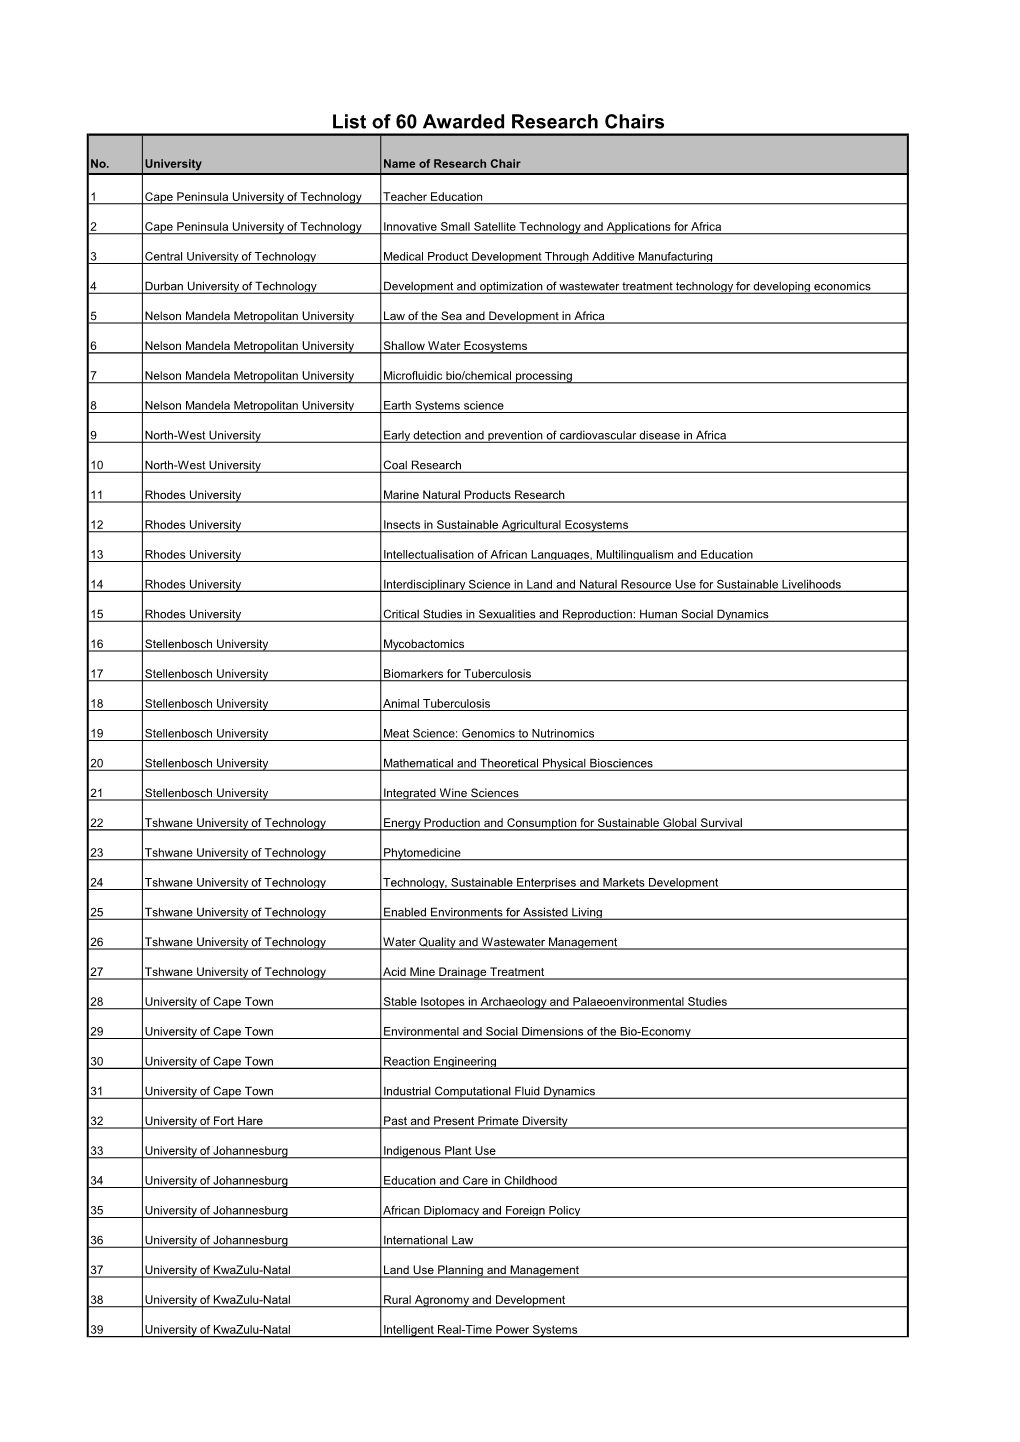 List of 60 Awarded Research Chairs